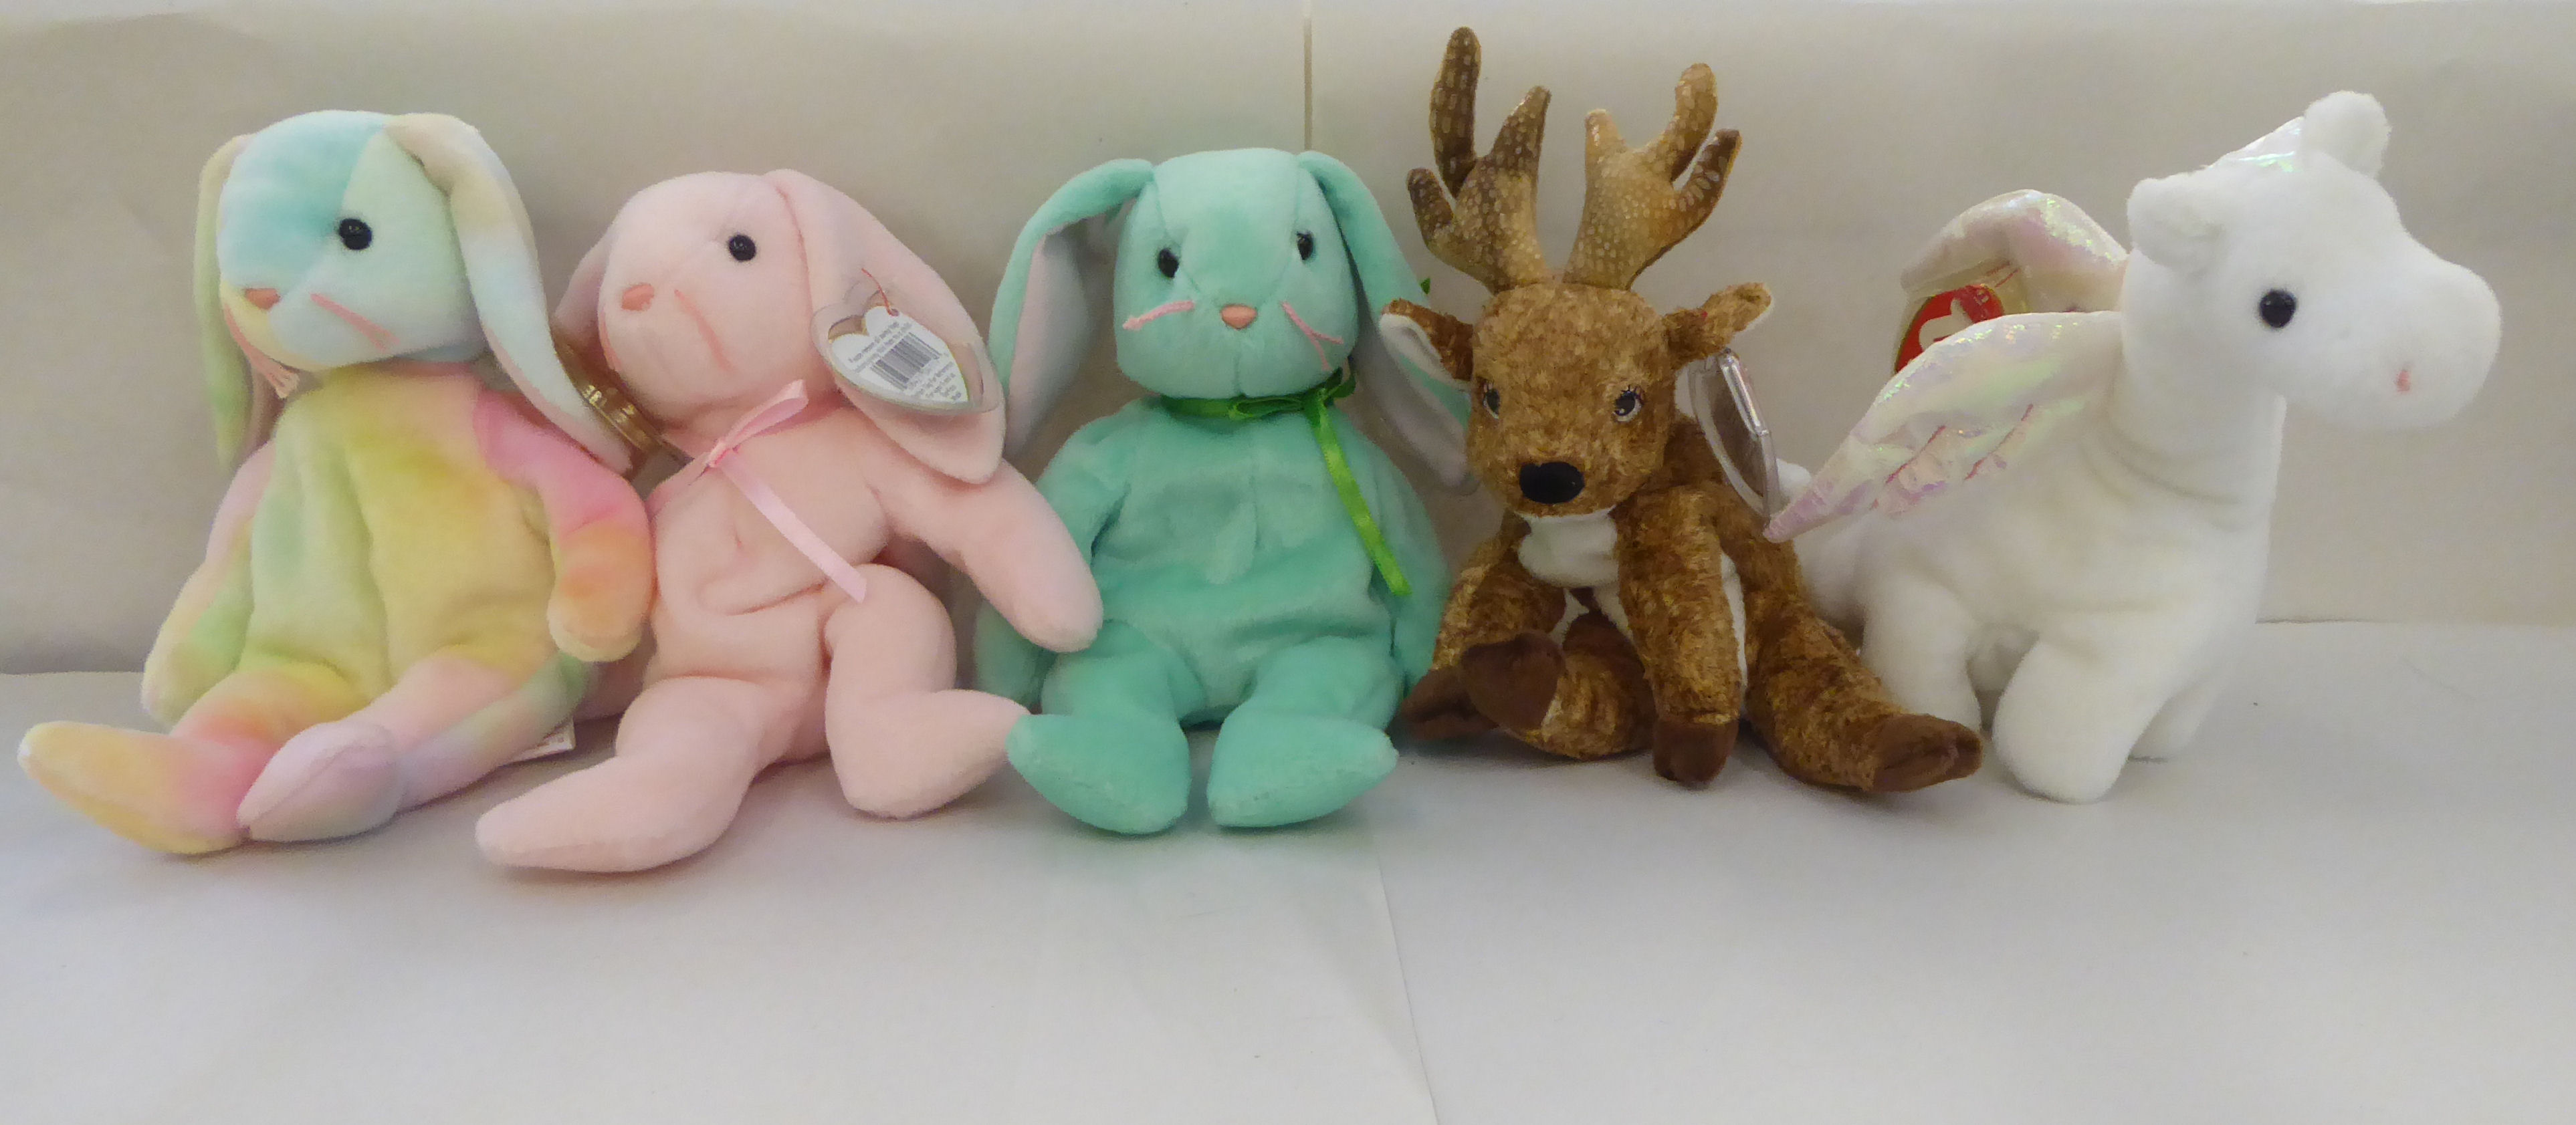 Twenty five Beanie Babies Teddy bears and animals: to include a bunny - Image 2 of 5